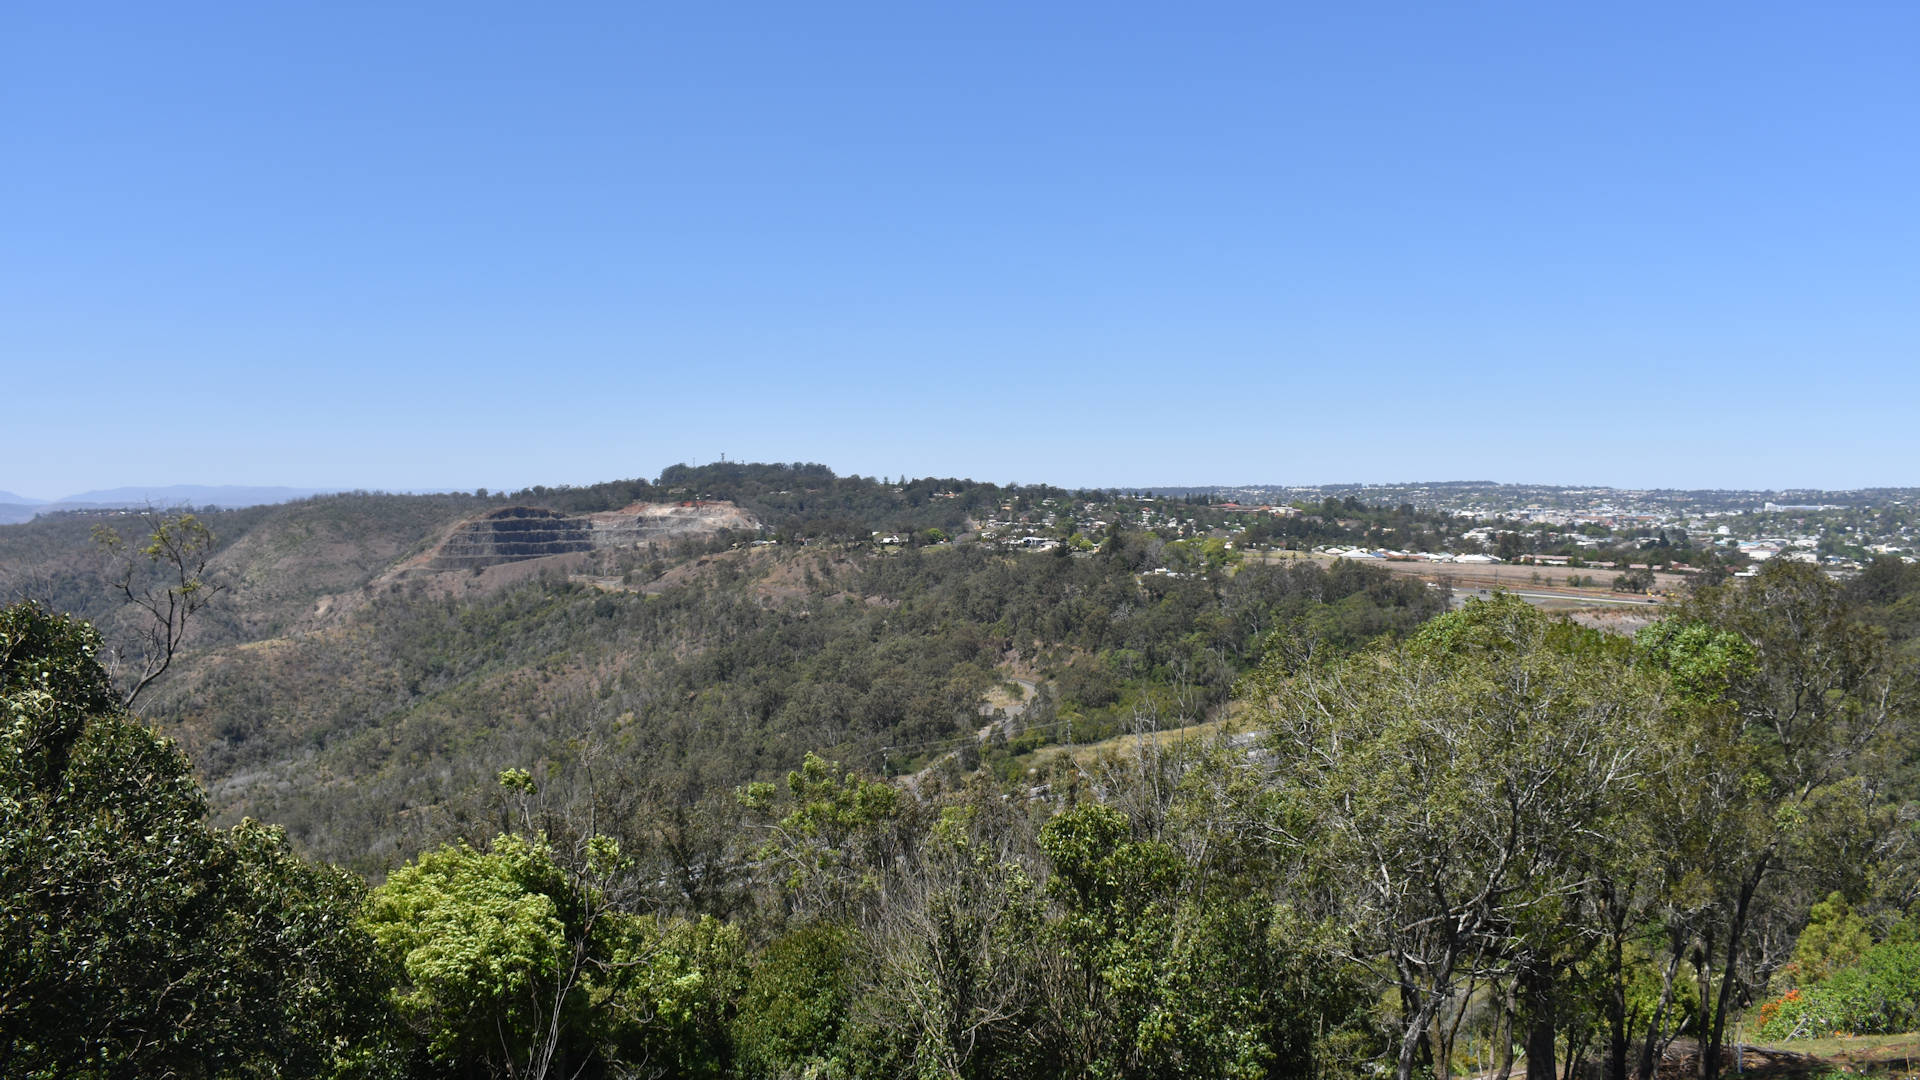 View from the Mount Kynoch Lookout